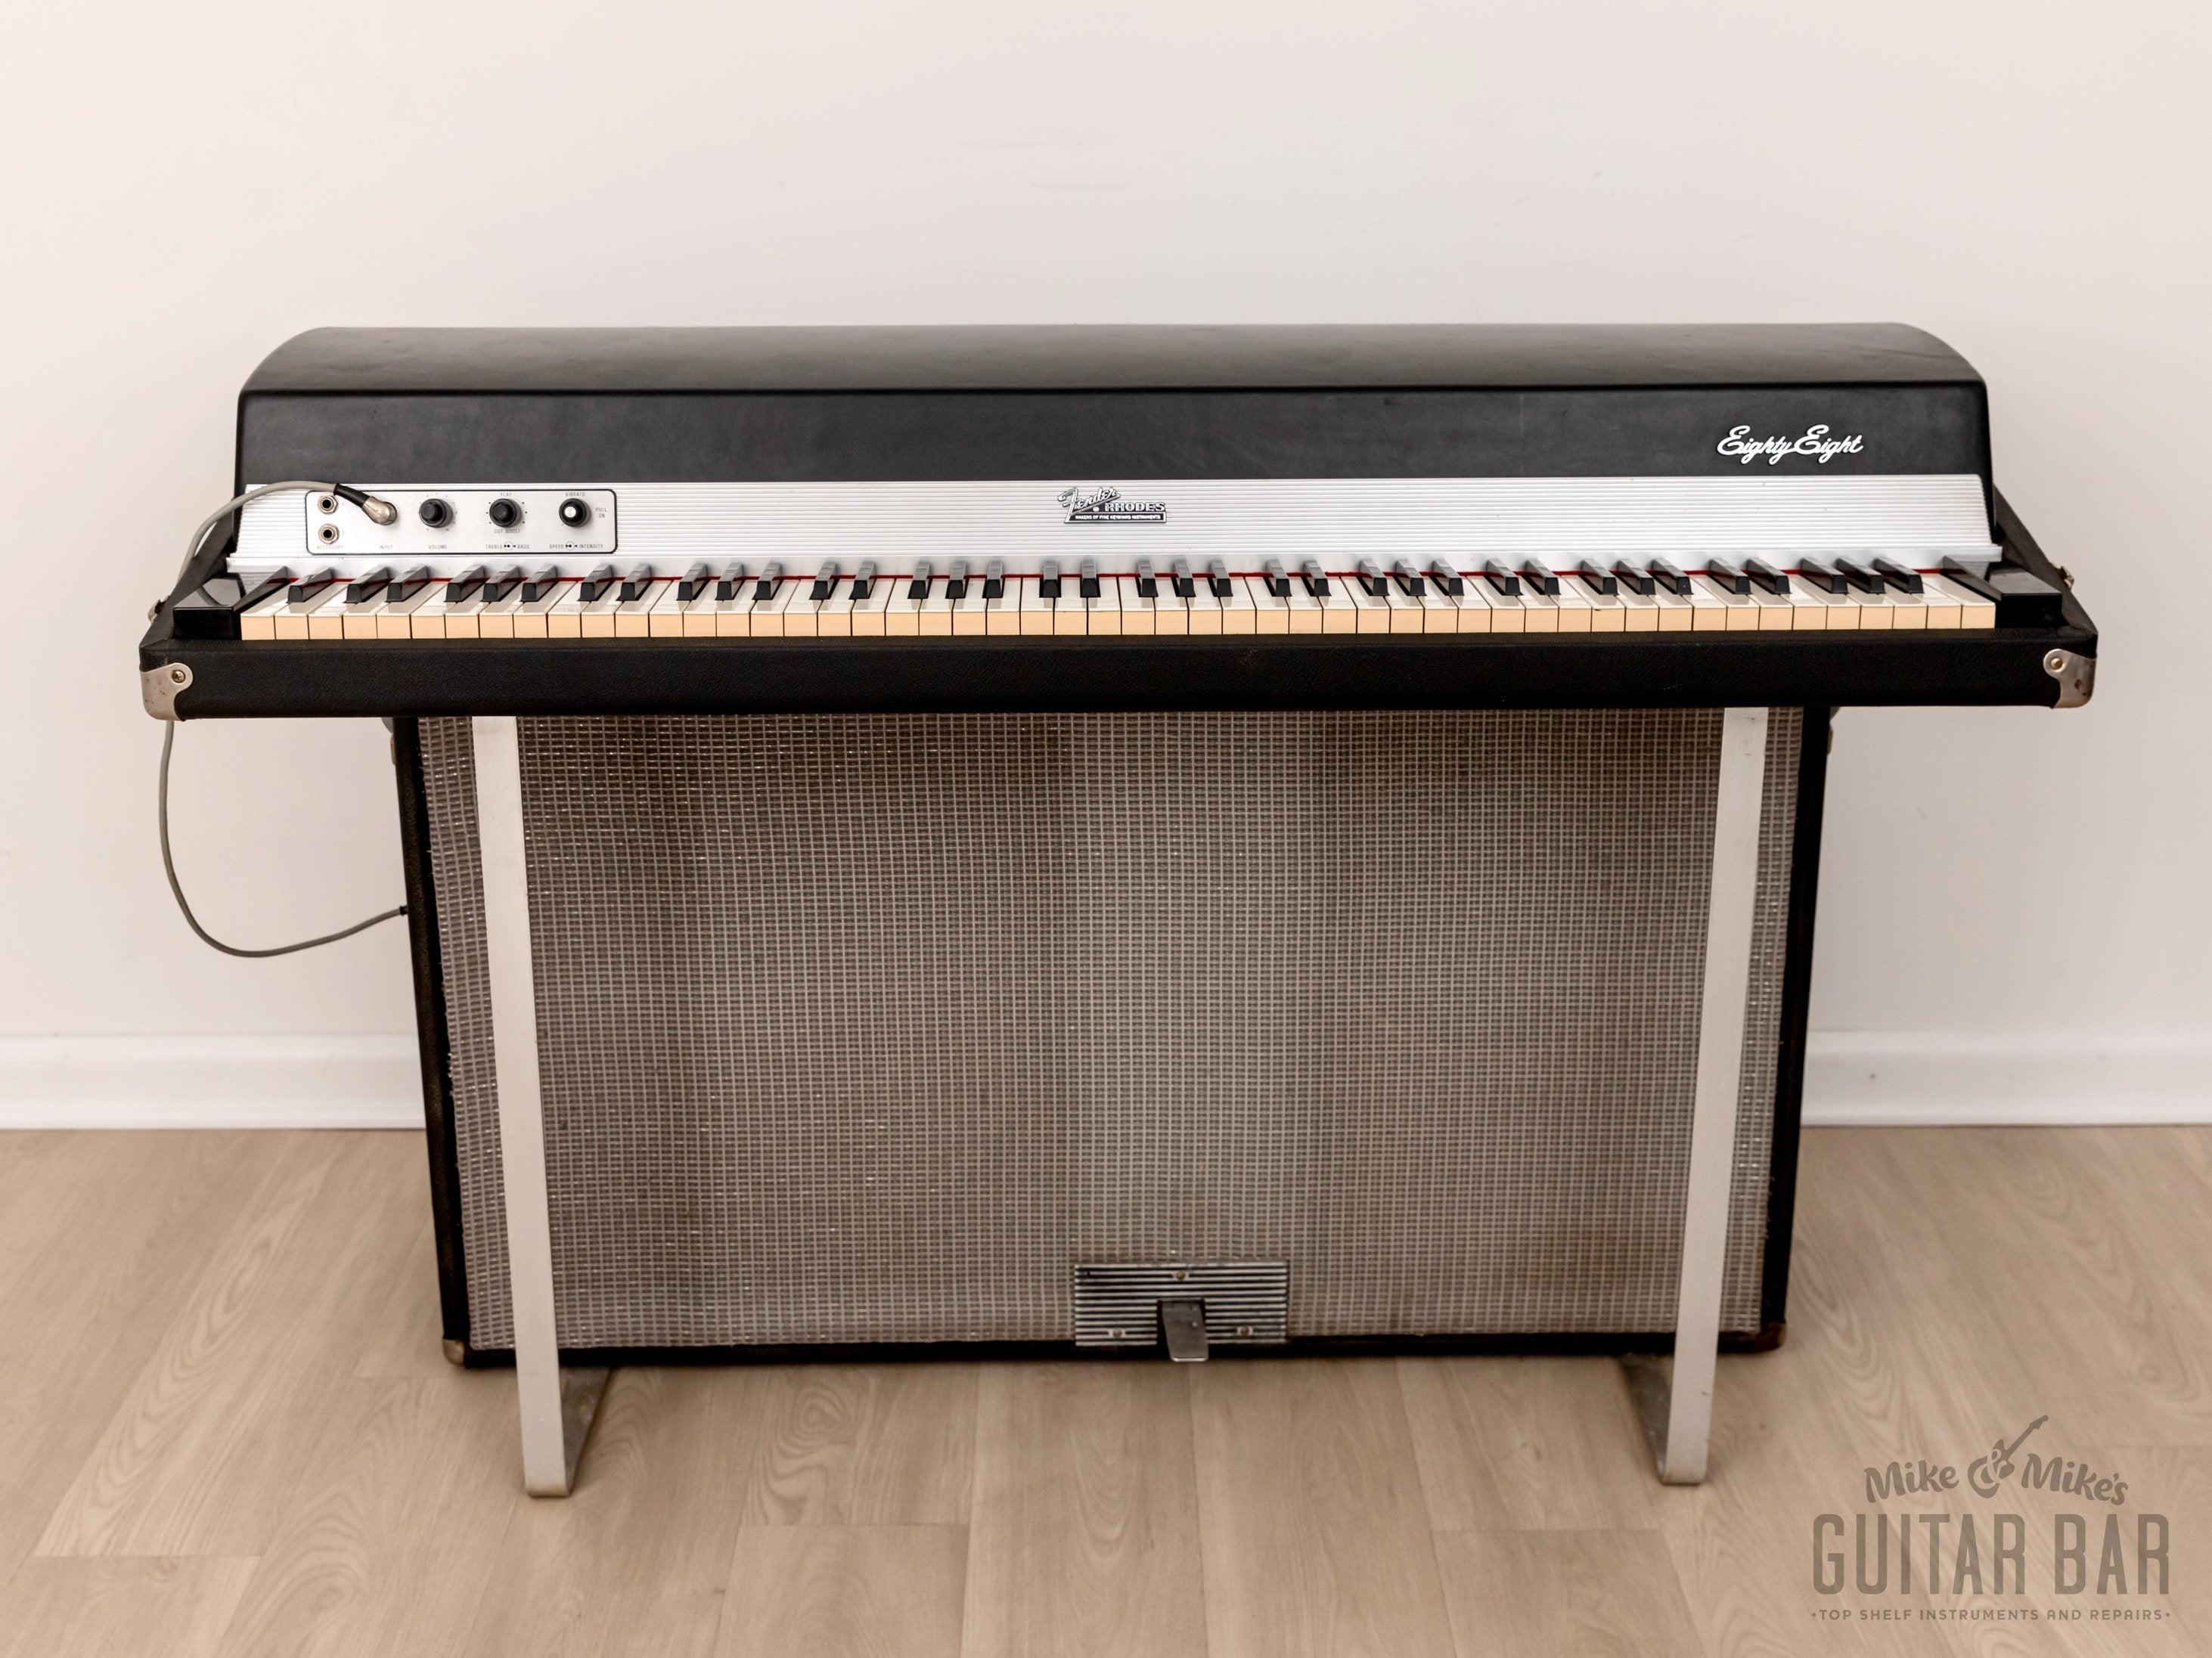 1974 Fender Rhodes Mk I Suitcase 88 Eighty Eight Vintage Electric Piano, Fully Serviced